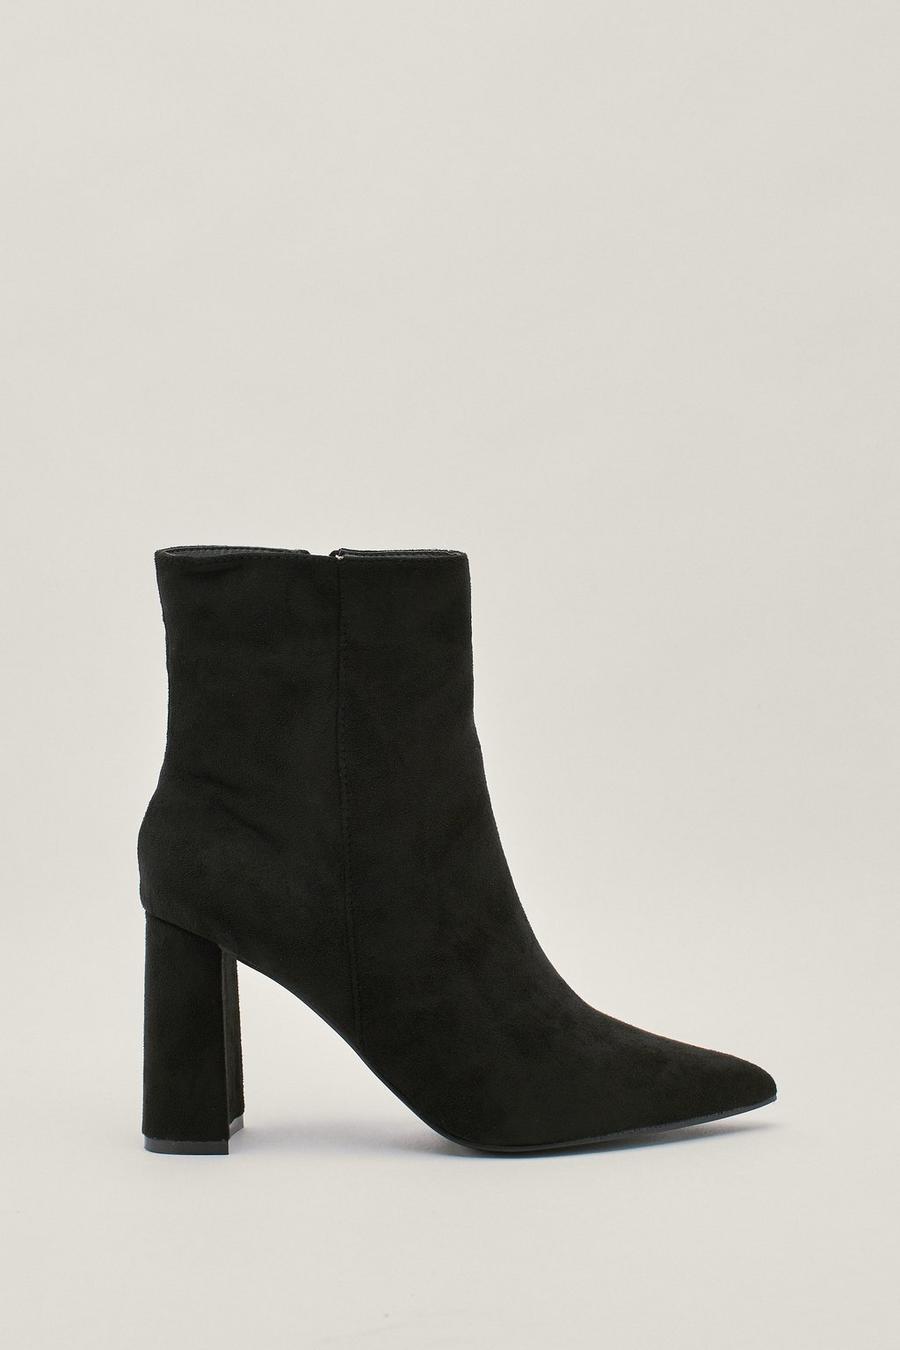 Immi Suede Ankle Boots